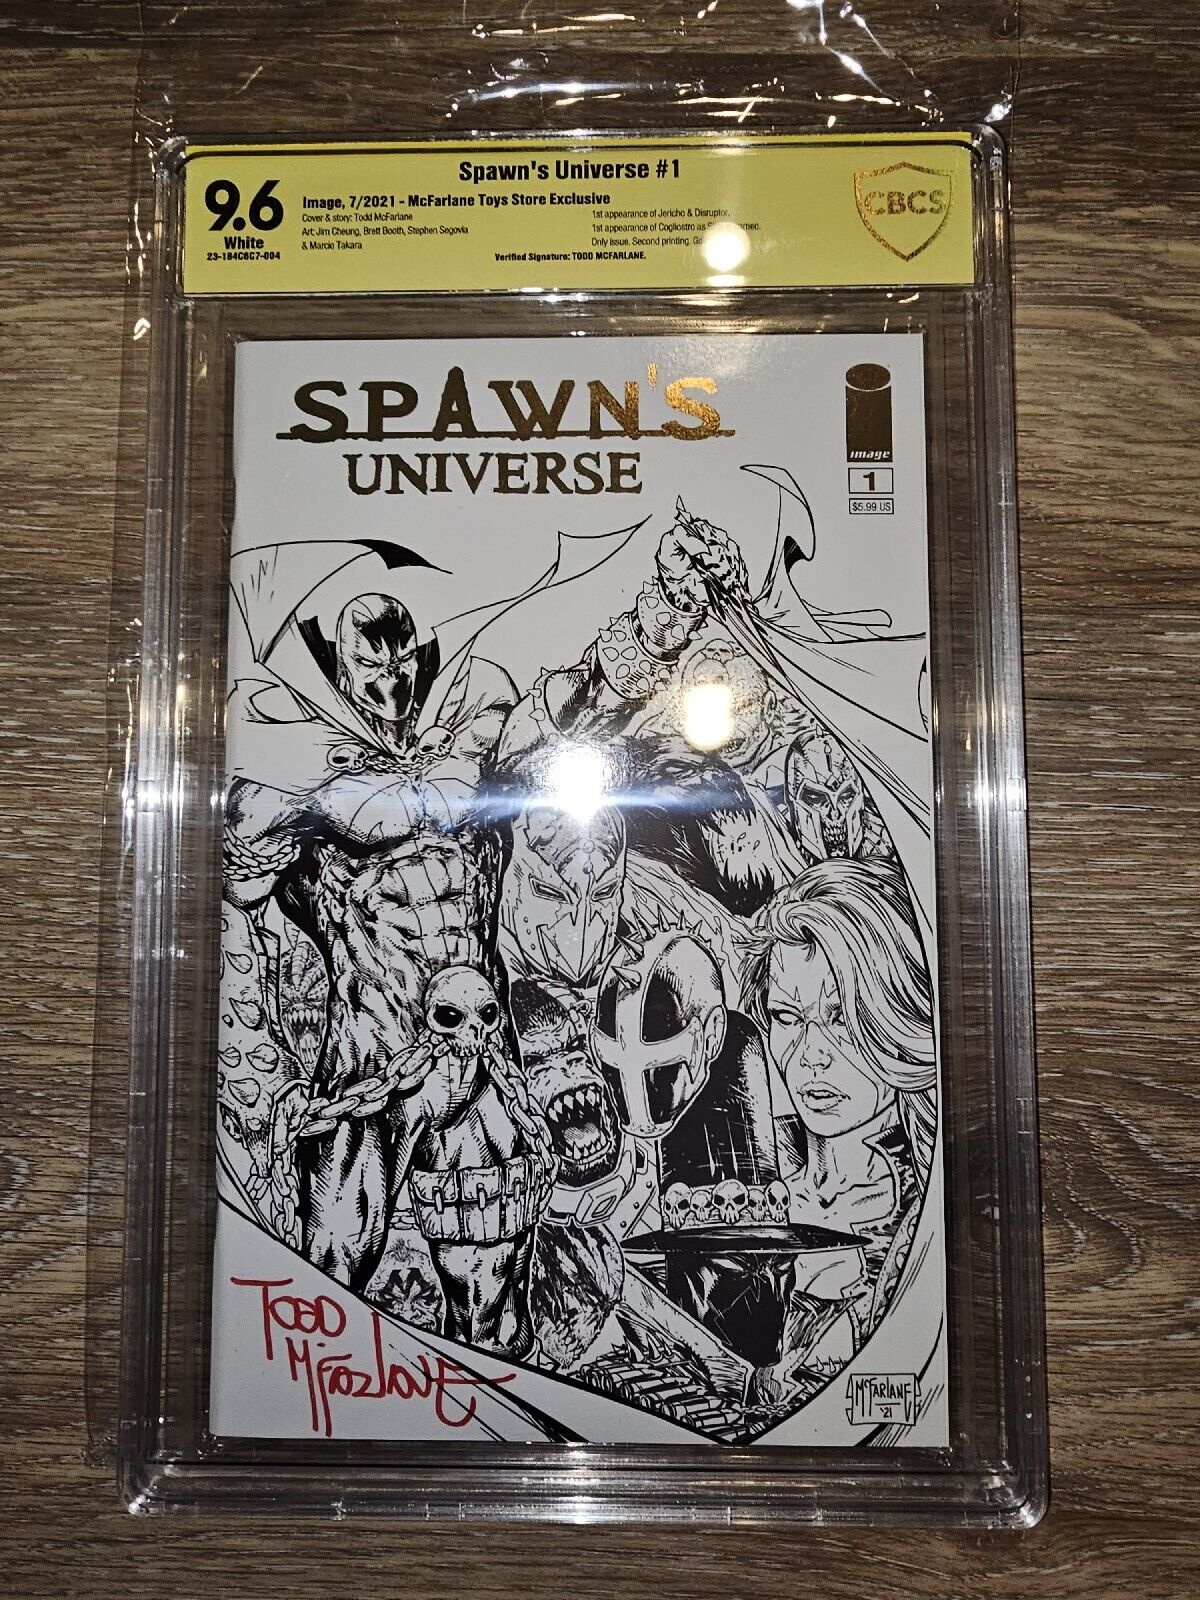 Spawn's Universe #1 Todd McFarlane Signed CBCS 9.6 Toy Store Gold Foil